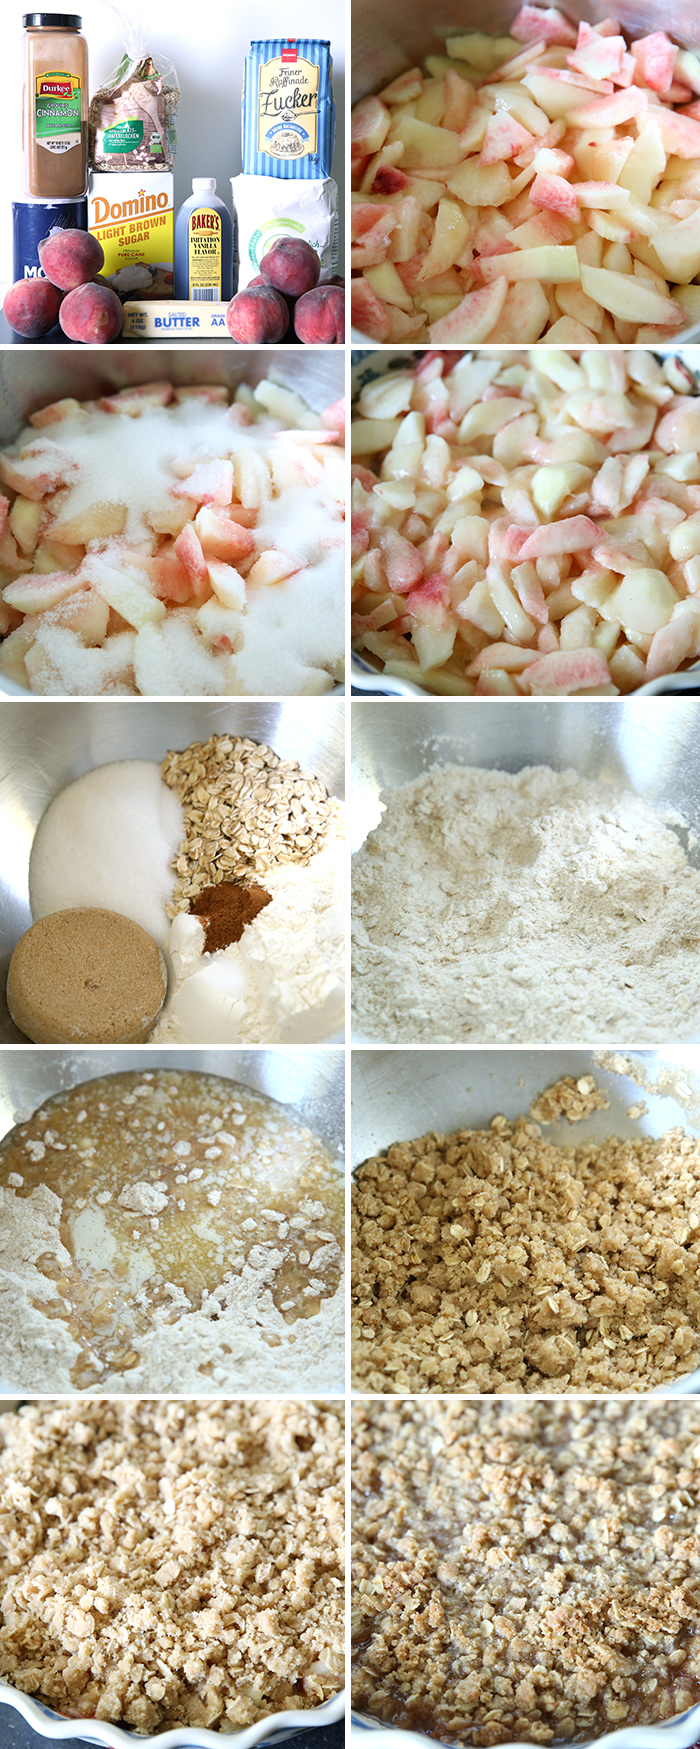 Step by step pictures for how to make fresh peach crisp. there are then photos in the picture collage.